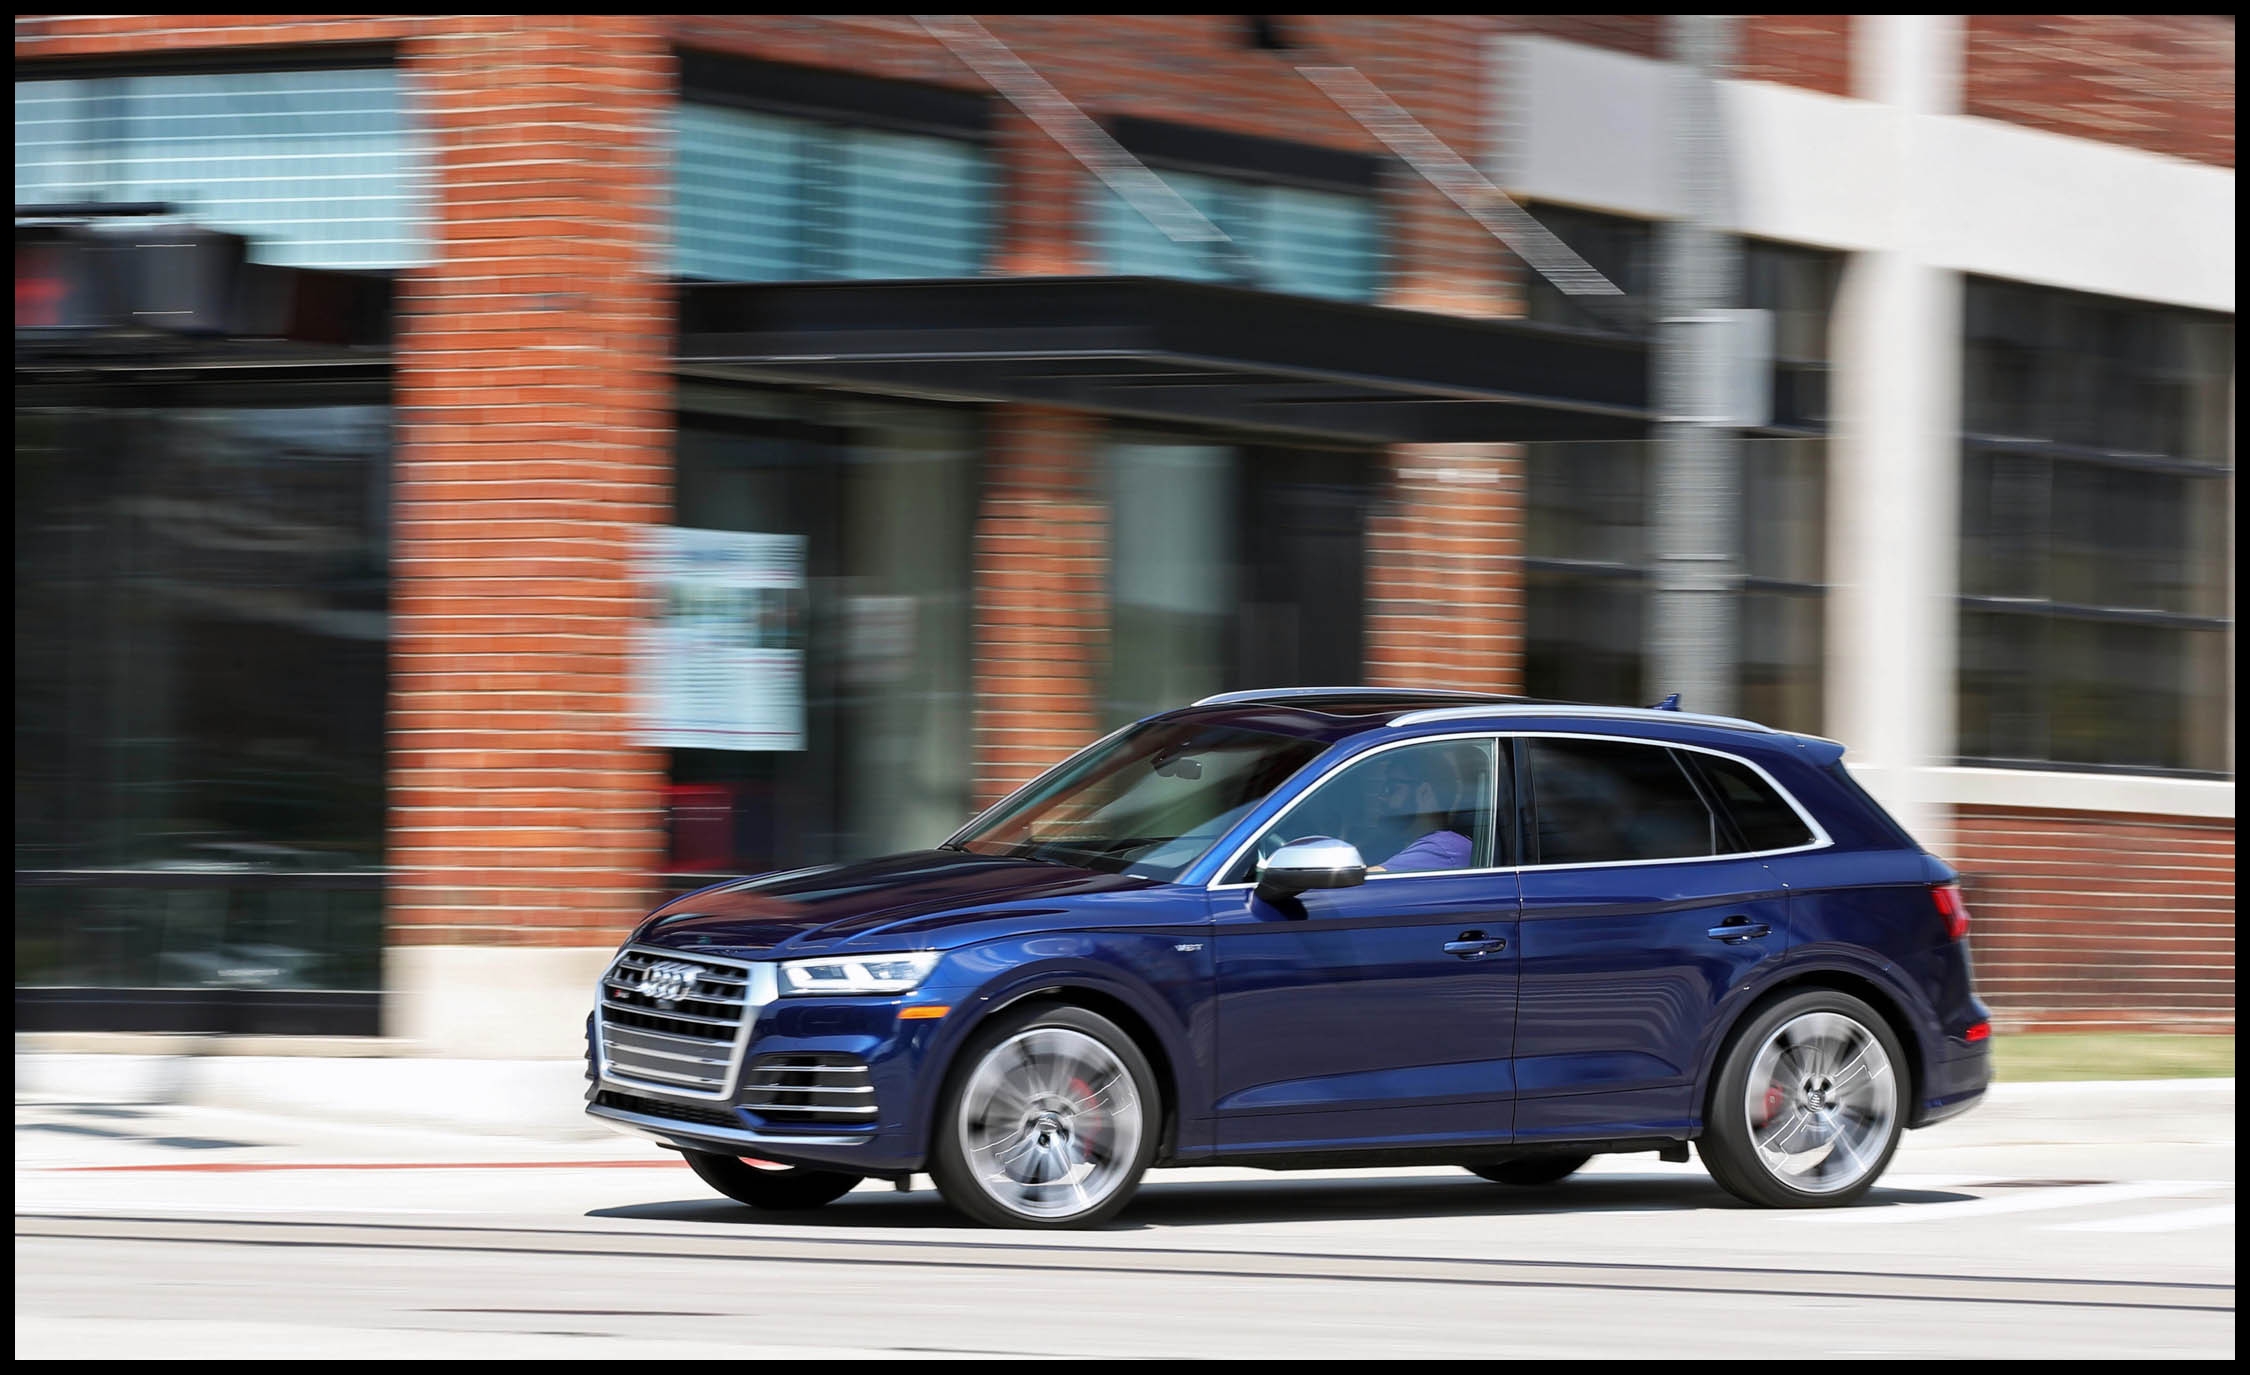 2019 Audi Driver assistance Package Unique 2018 Audi Sq5 Safety and Driver assistance Review